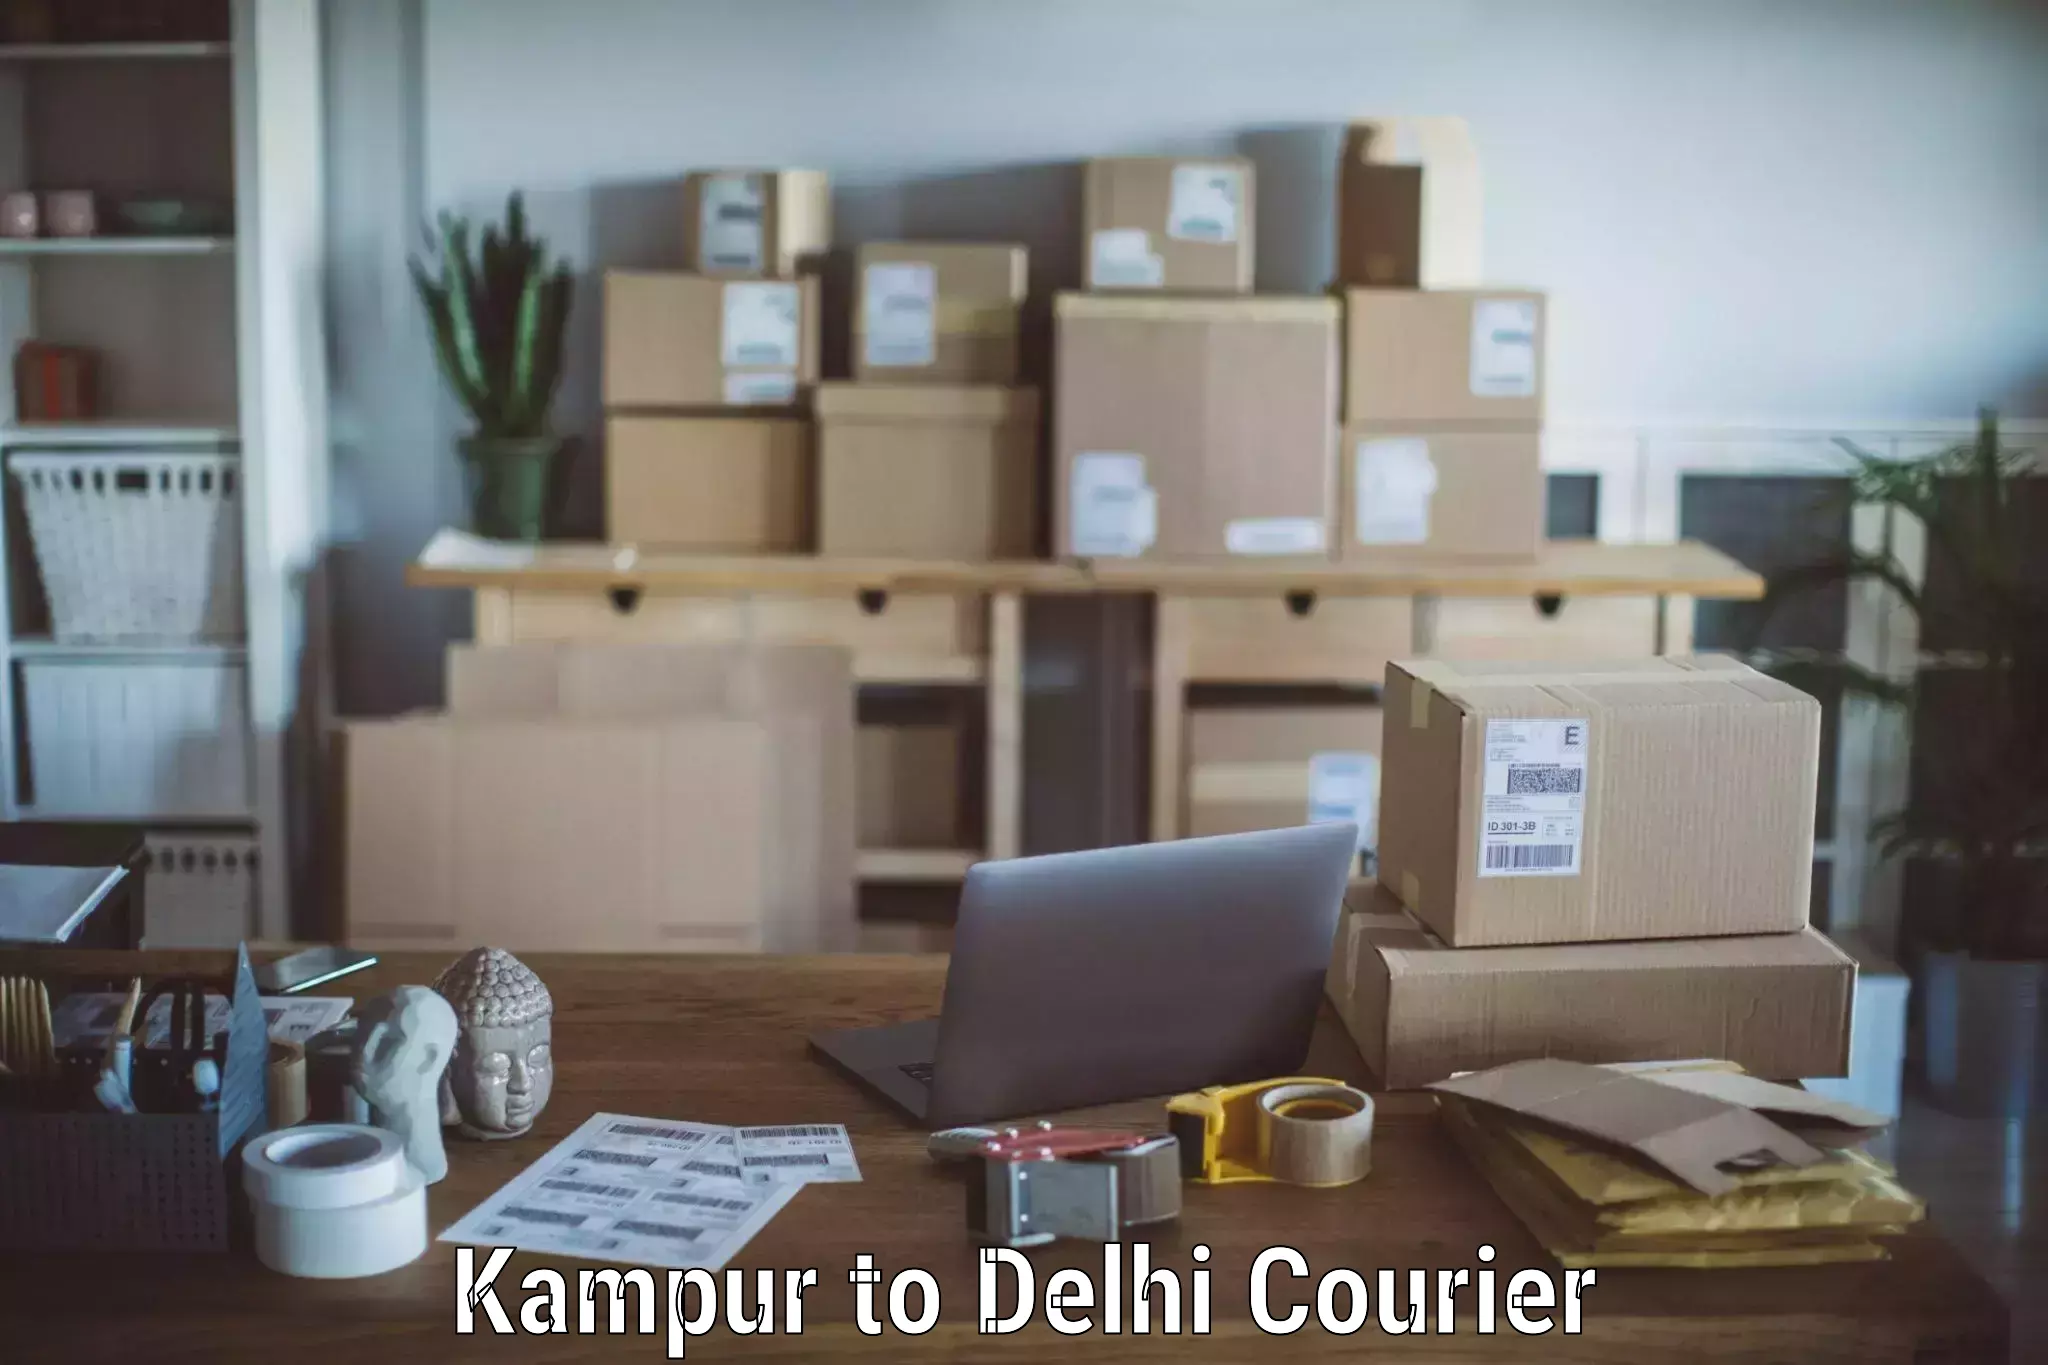 Trusted moving company Kampur to Delhi